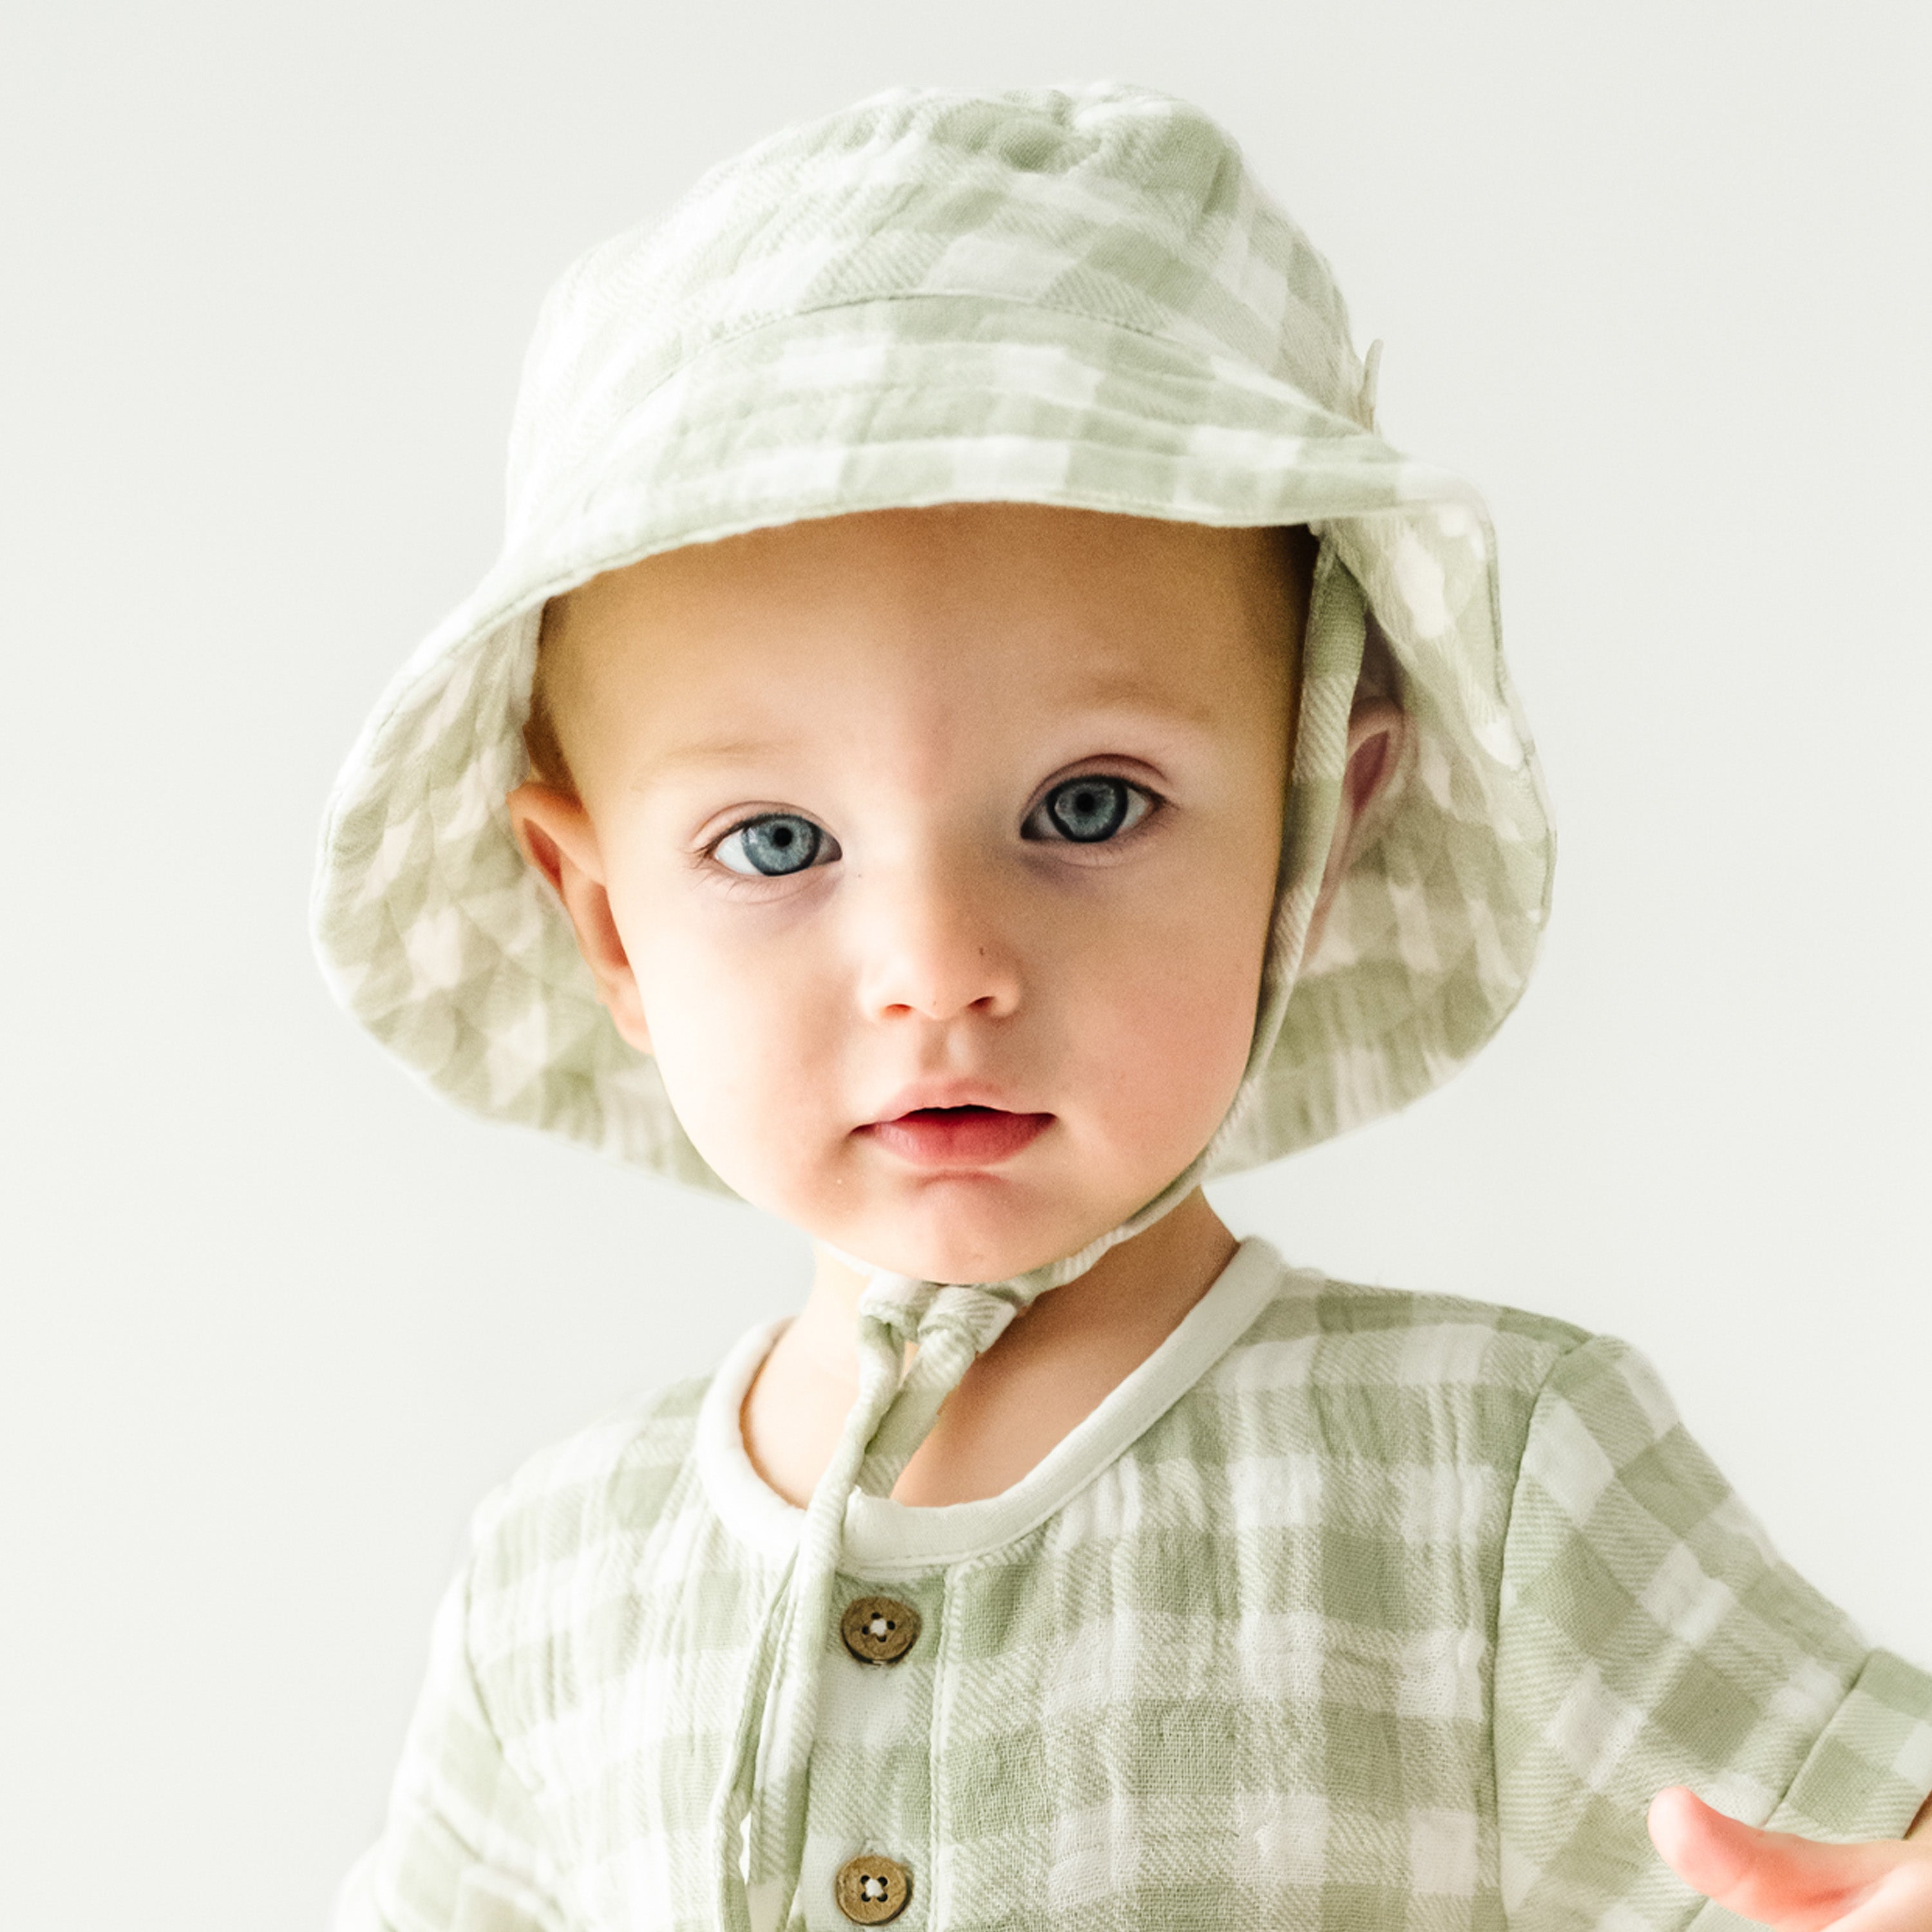 A baby with blue eyes wearing a light green checkered outfit and an Organic Muslin Bucket Sun Hat in Gingham by Makemake Organics, looking directly at the camera with a subtle expression.